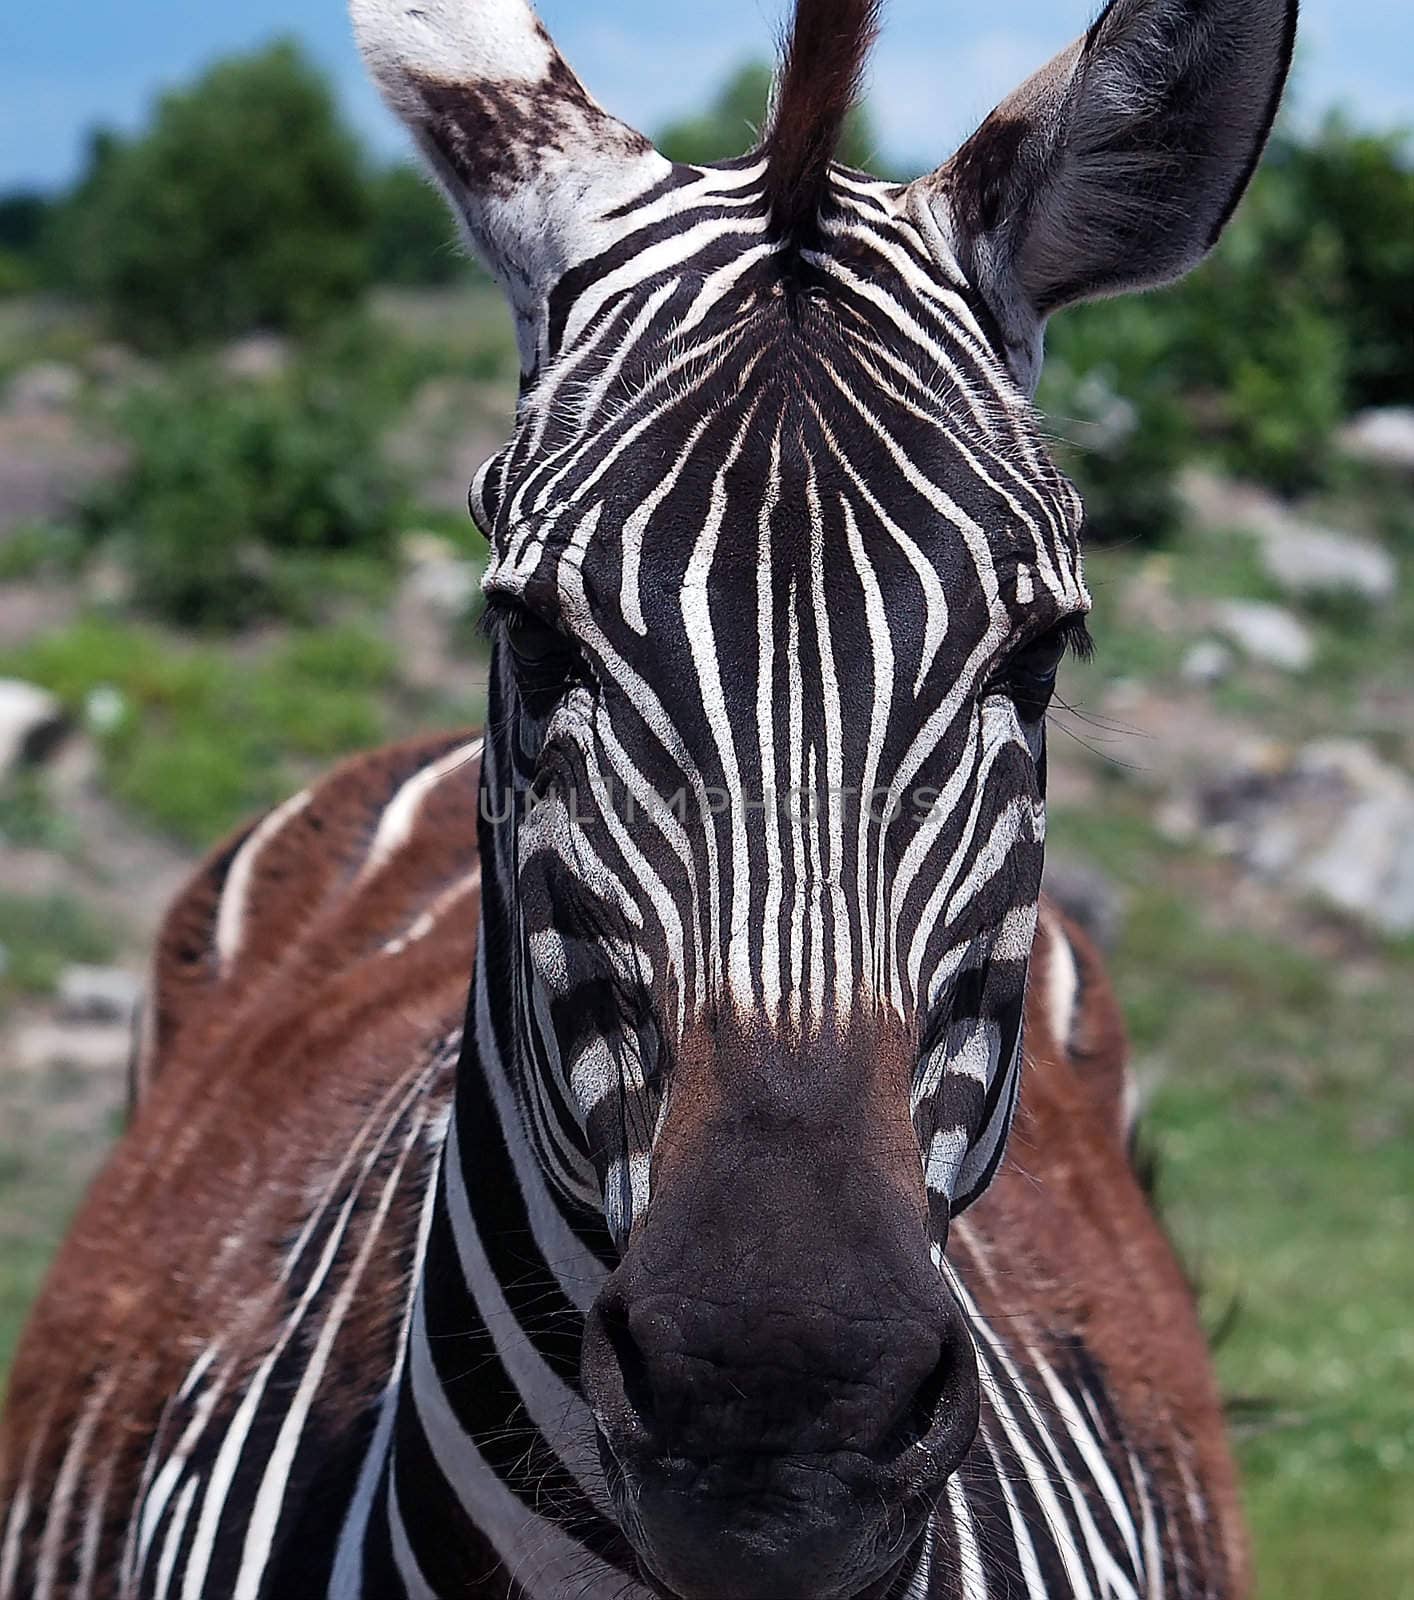 Close up portrait of a zebra starring at the photographer